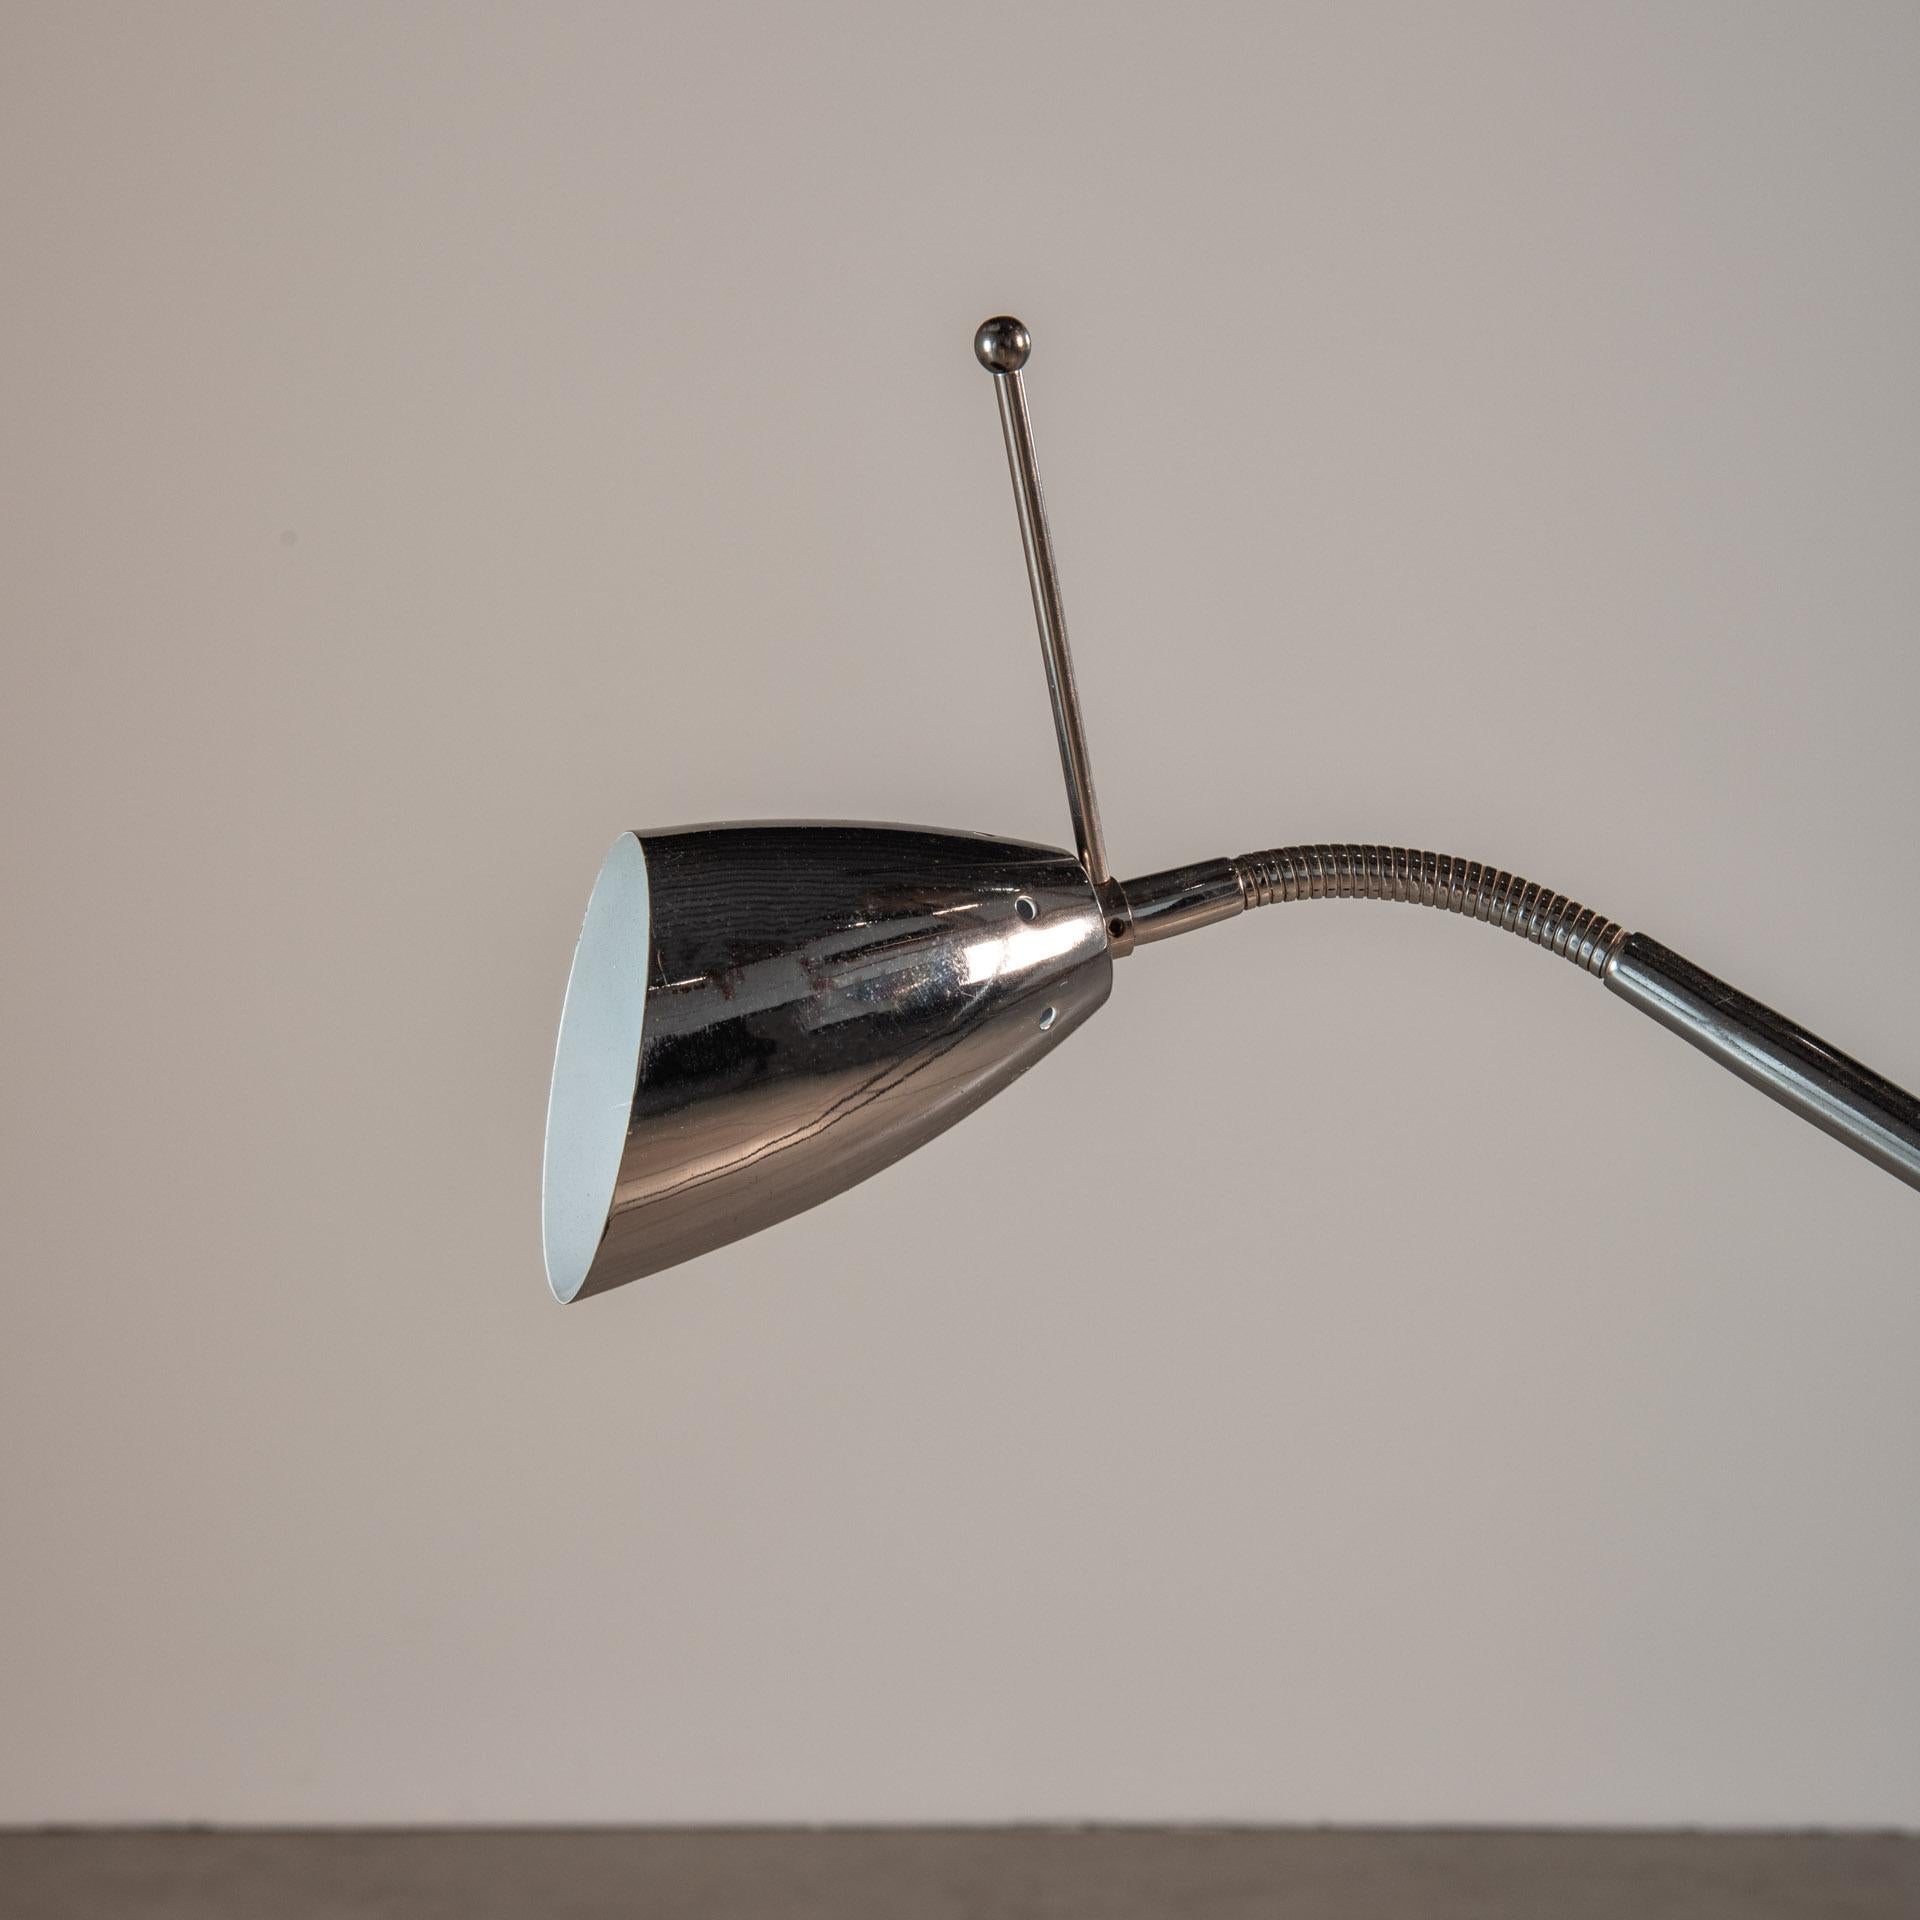 20th Century Floor Lamp in Chrome with two Arms, by Dominici, Brazilian Mid-Century Design For Sale